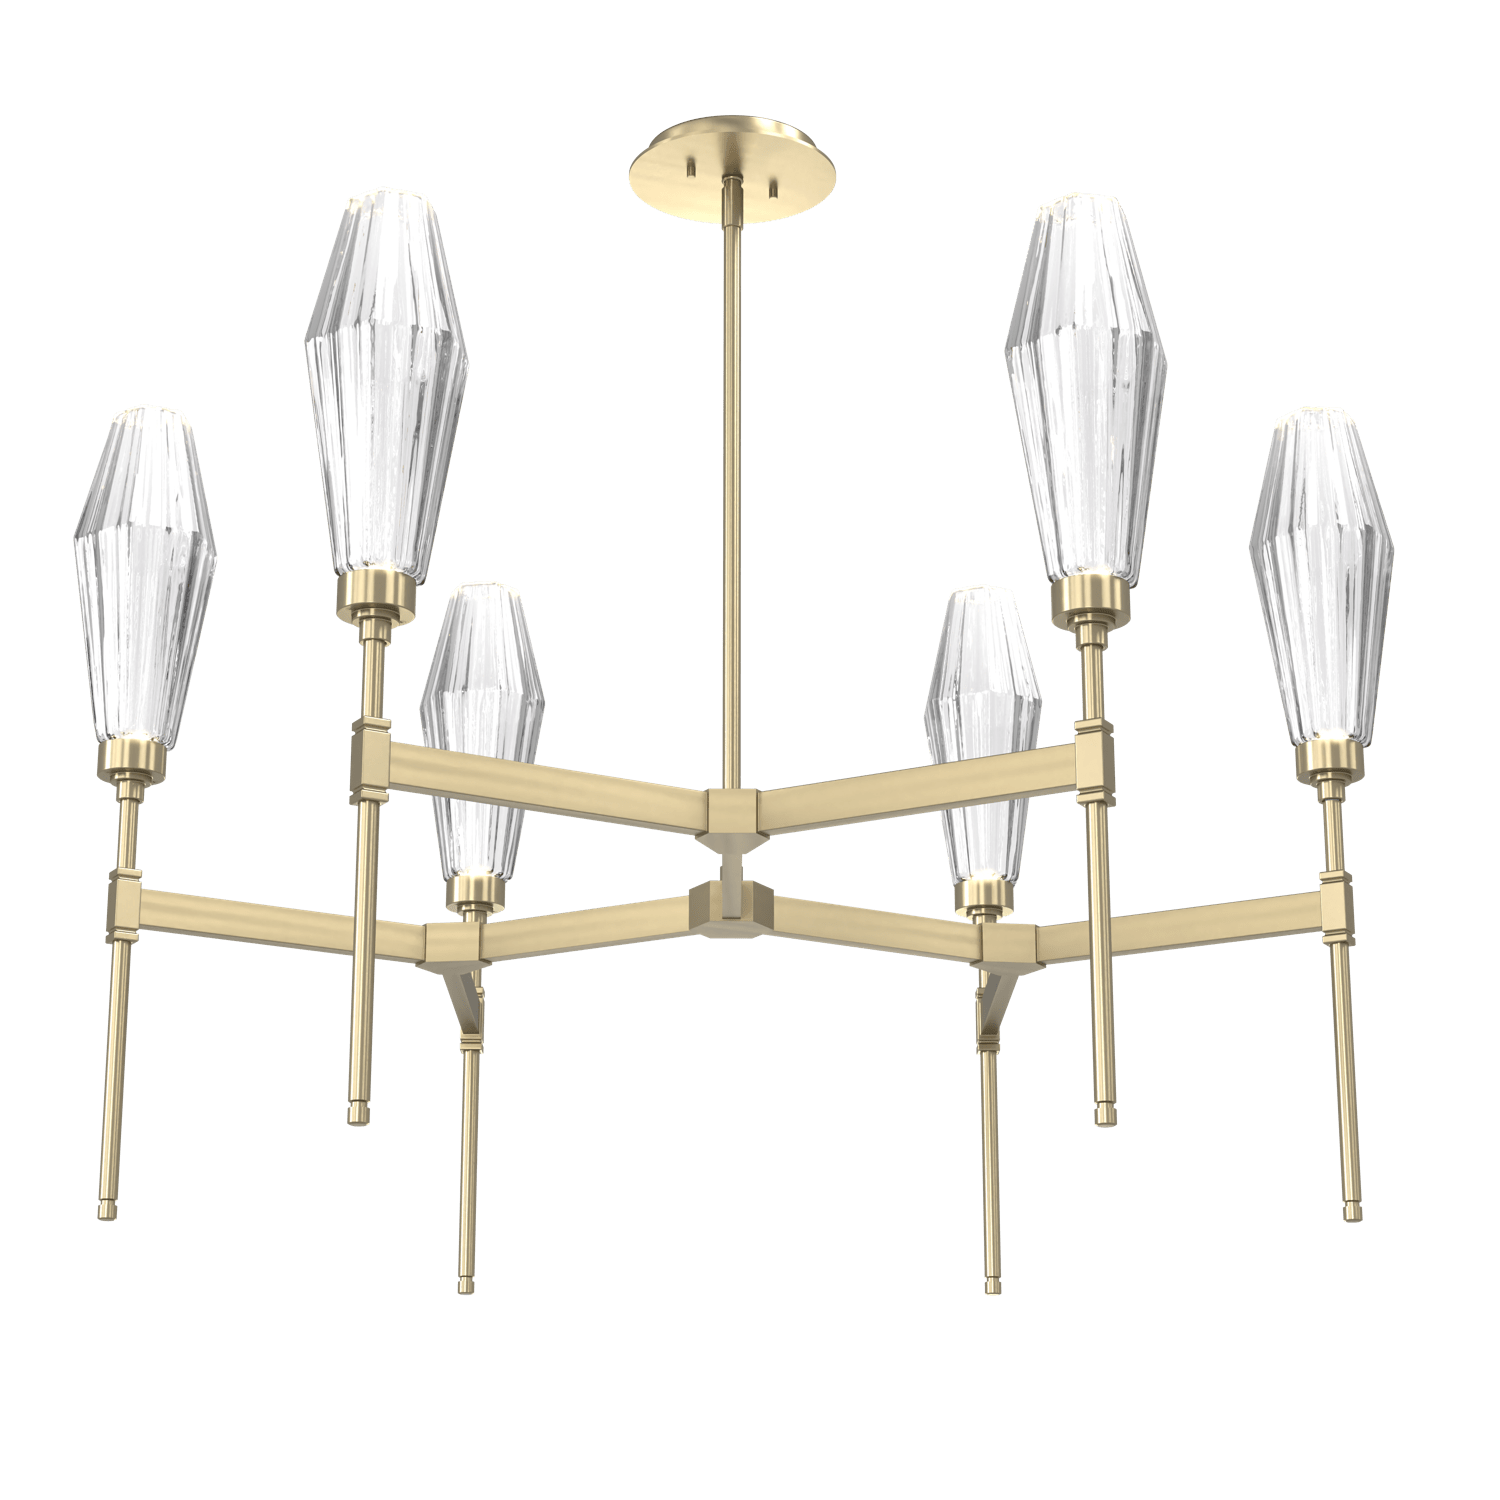 CHB0049-37-HB-RC-Hammerton-Studio-Aalto-37-inch-round-belvedere-chandelier-with-heritage-brass-finish-and-optic-ribbed-clear-glass-shades-and-LED-lamping